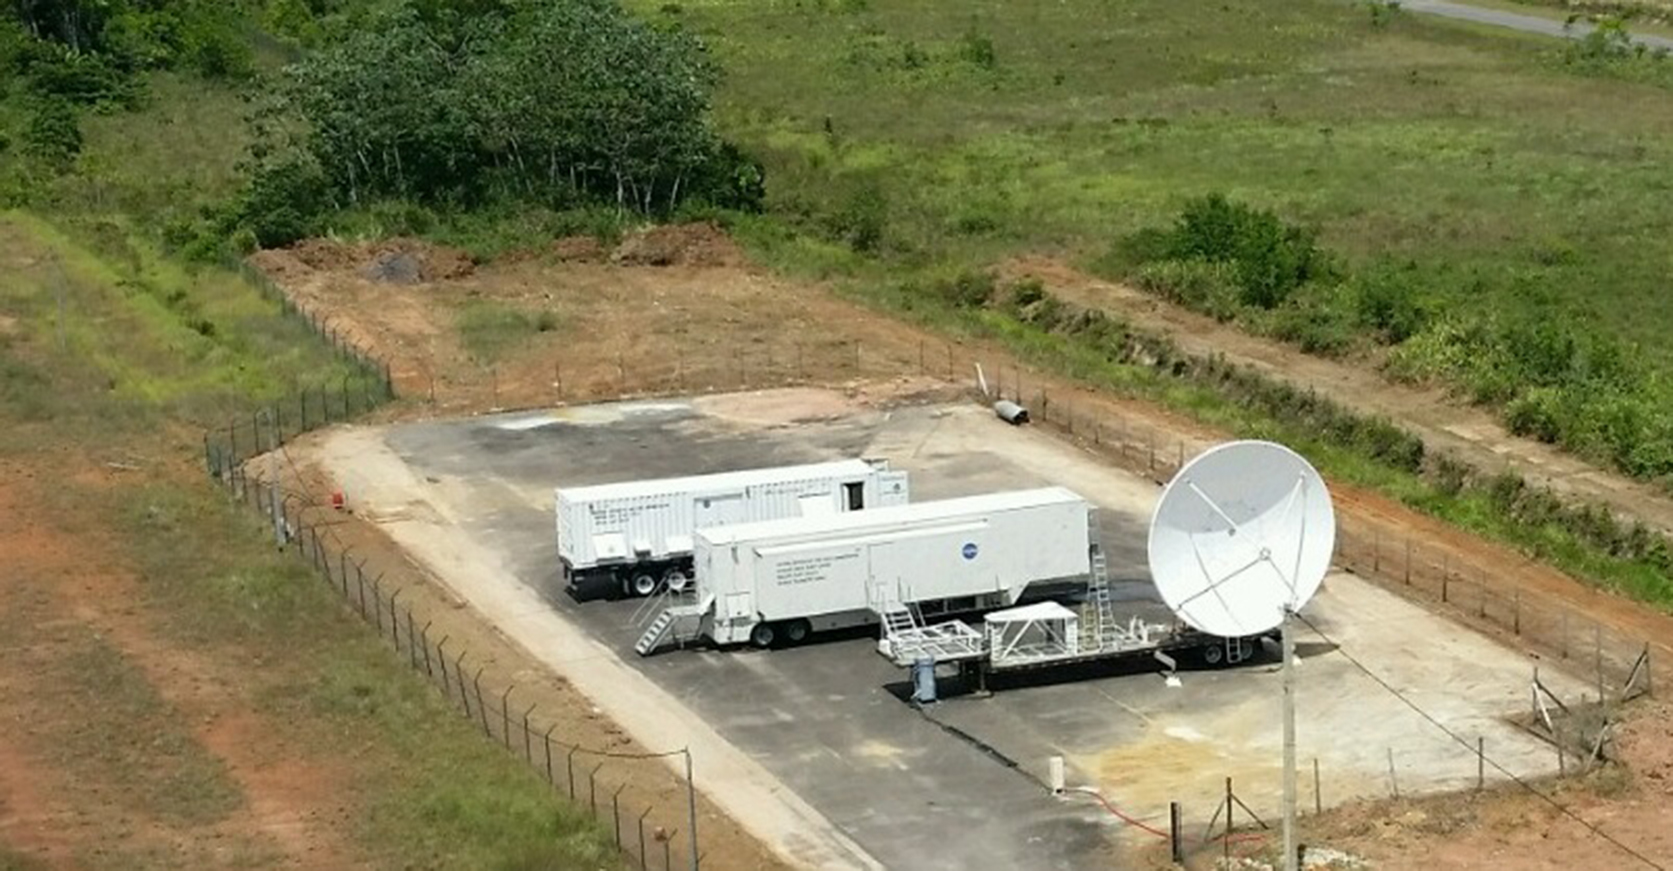 Two white trailers and a large white antenna are setup on an asphalt pad in the middle of a field.